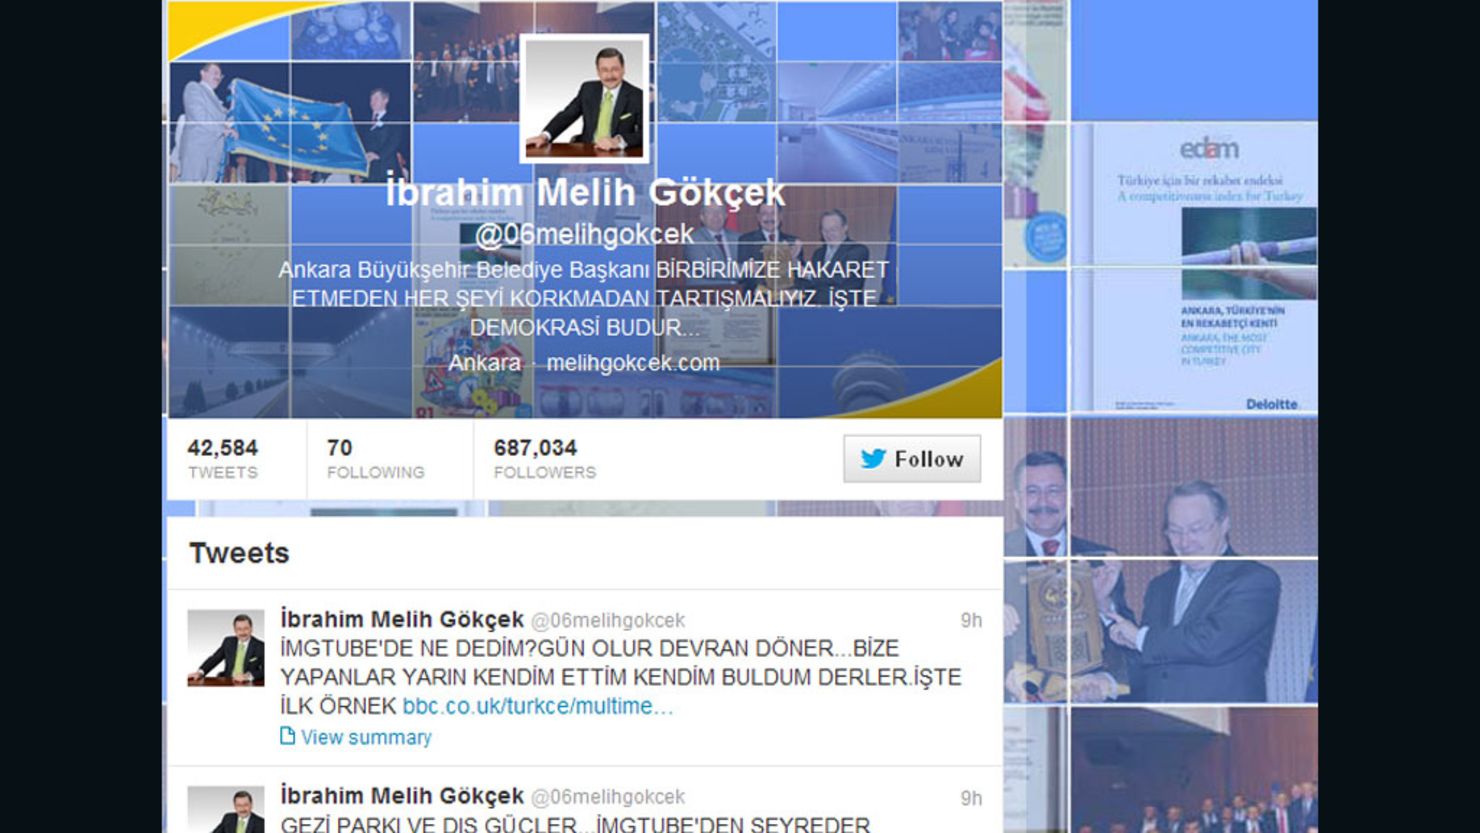 A detail from Melih Gokcek's Twitter page.